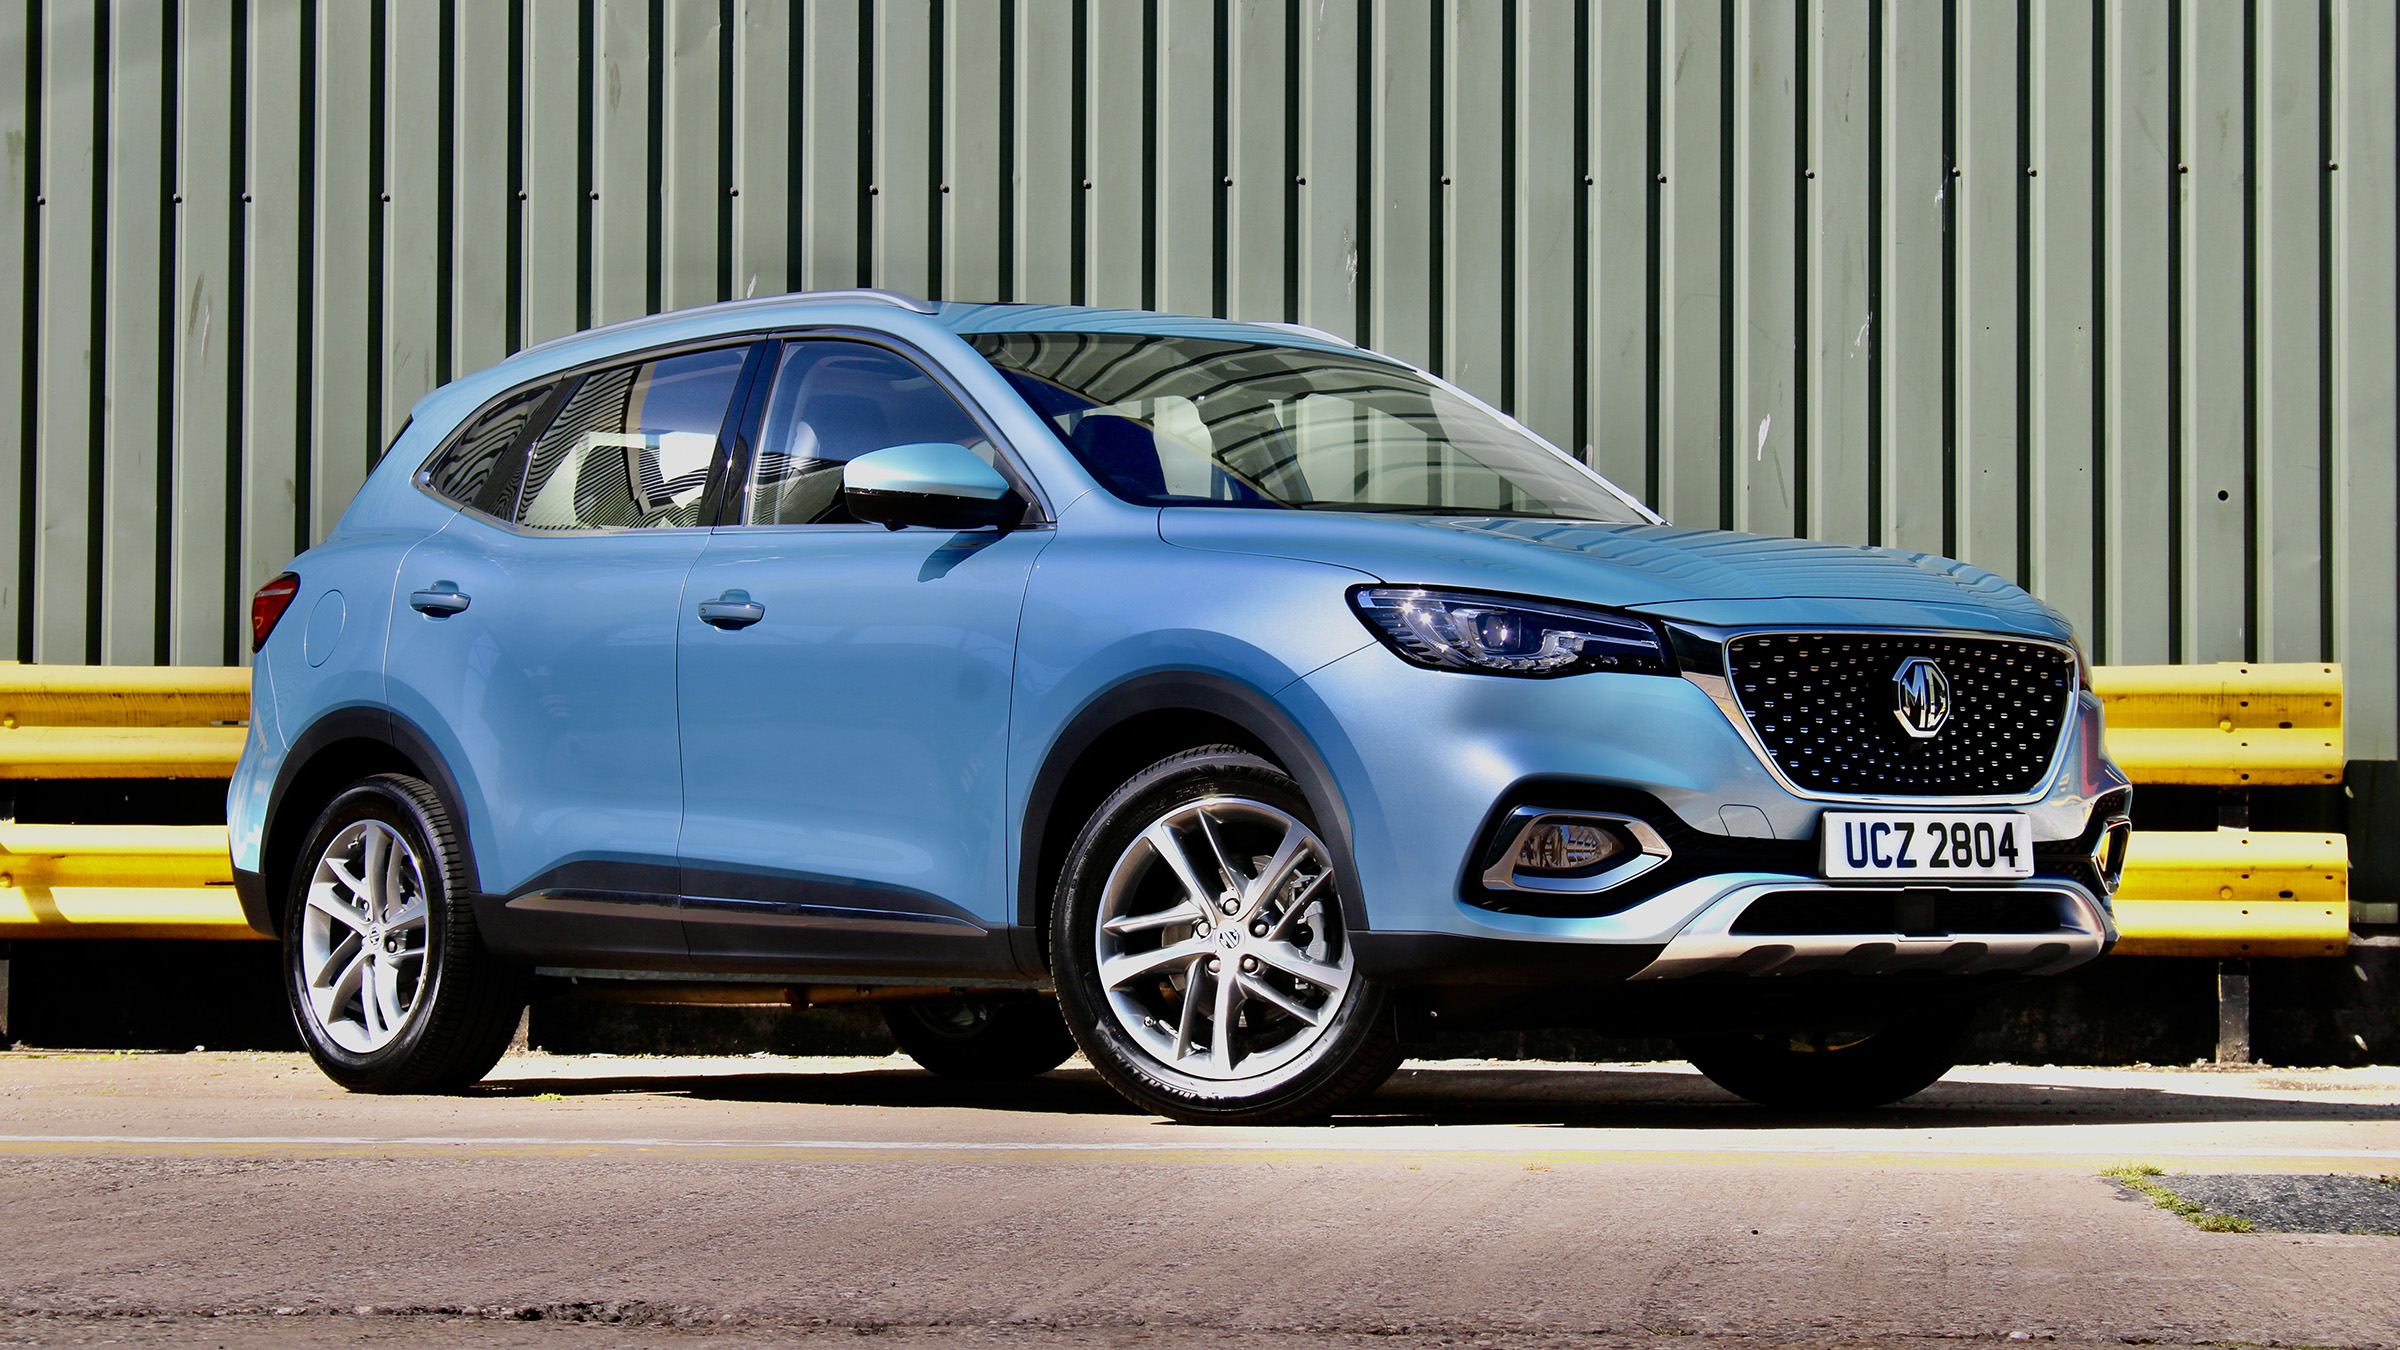 mg-hs-plug-in-hybrid-suv-now-on-sale-carbuyer